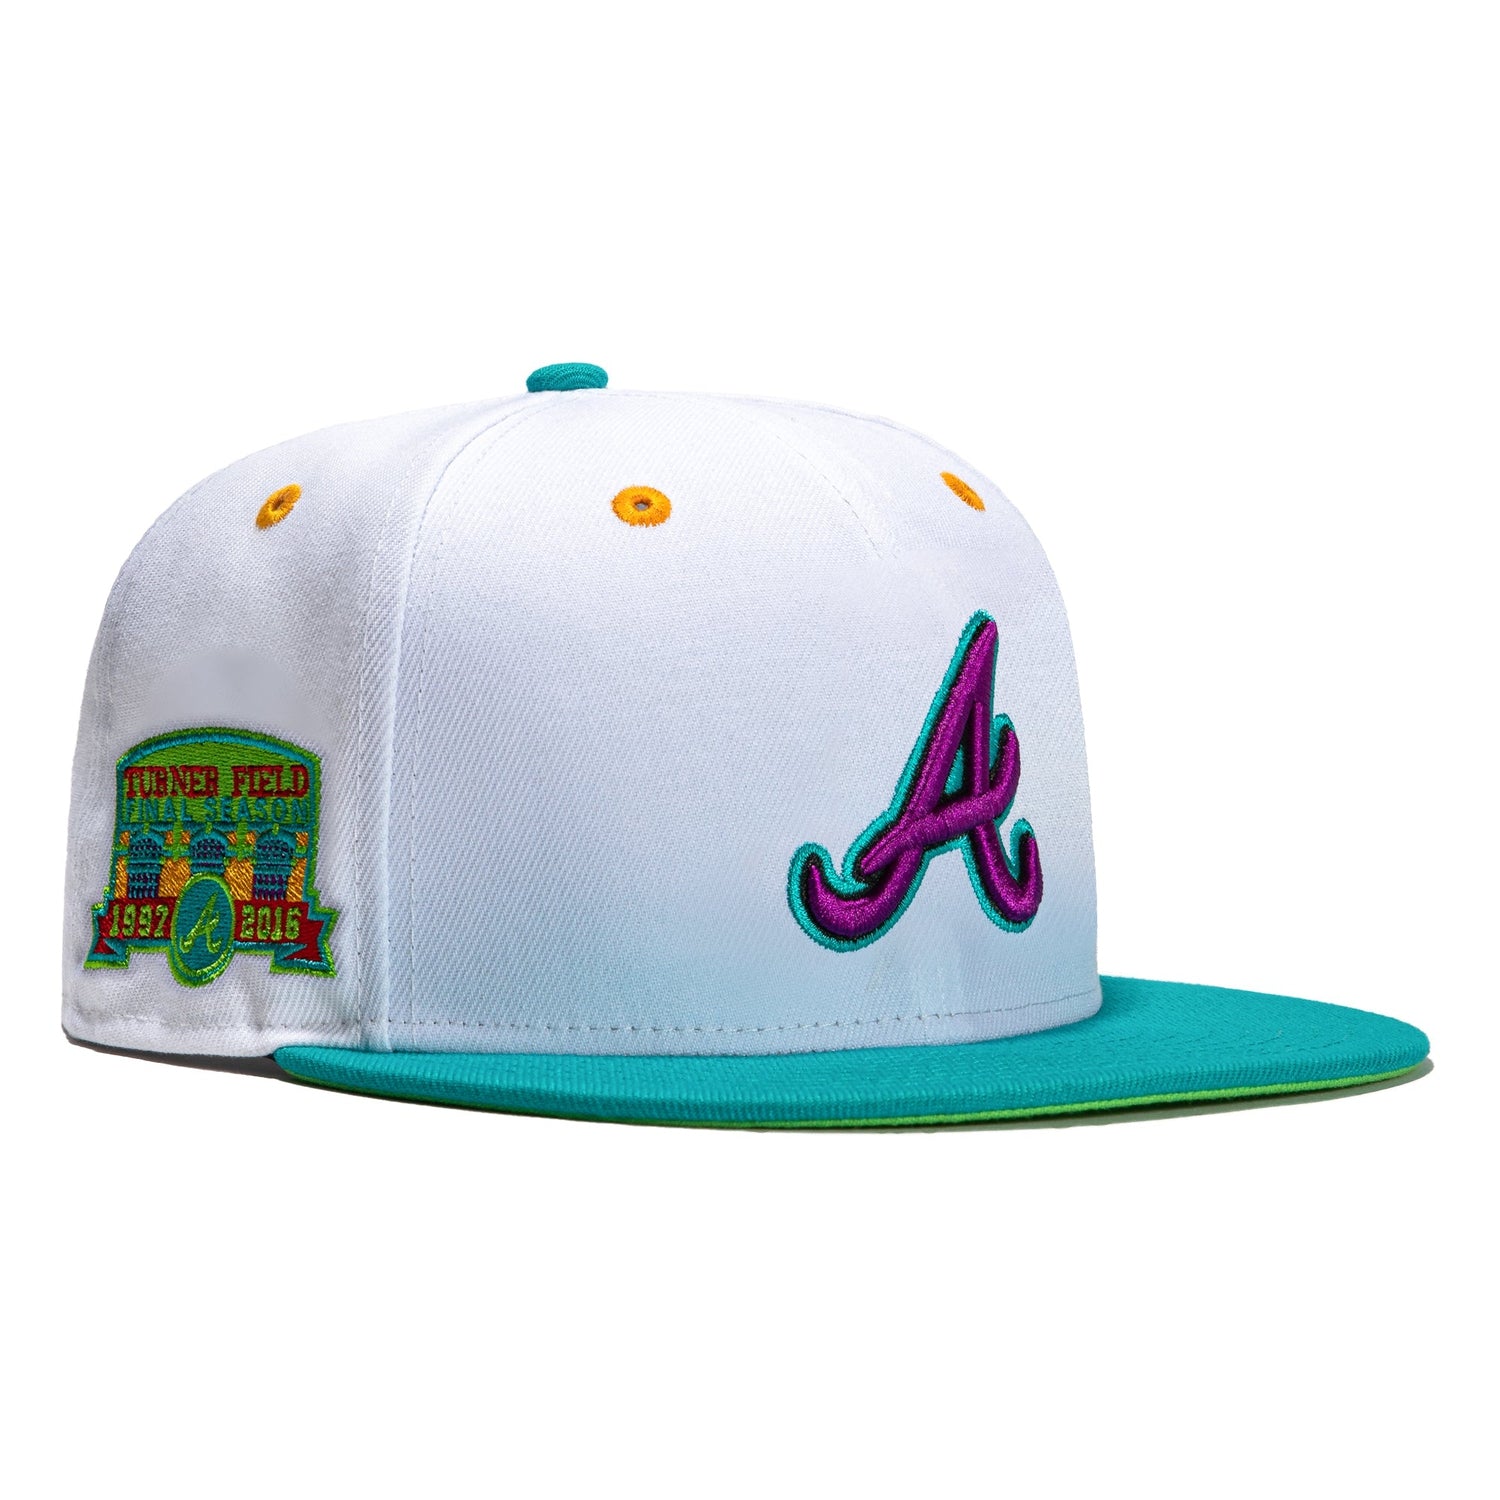 Atlanta Braves Throwback 59FIFTY Fitted Hat, Blue - Size: 8, MLB by New Era